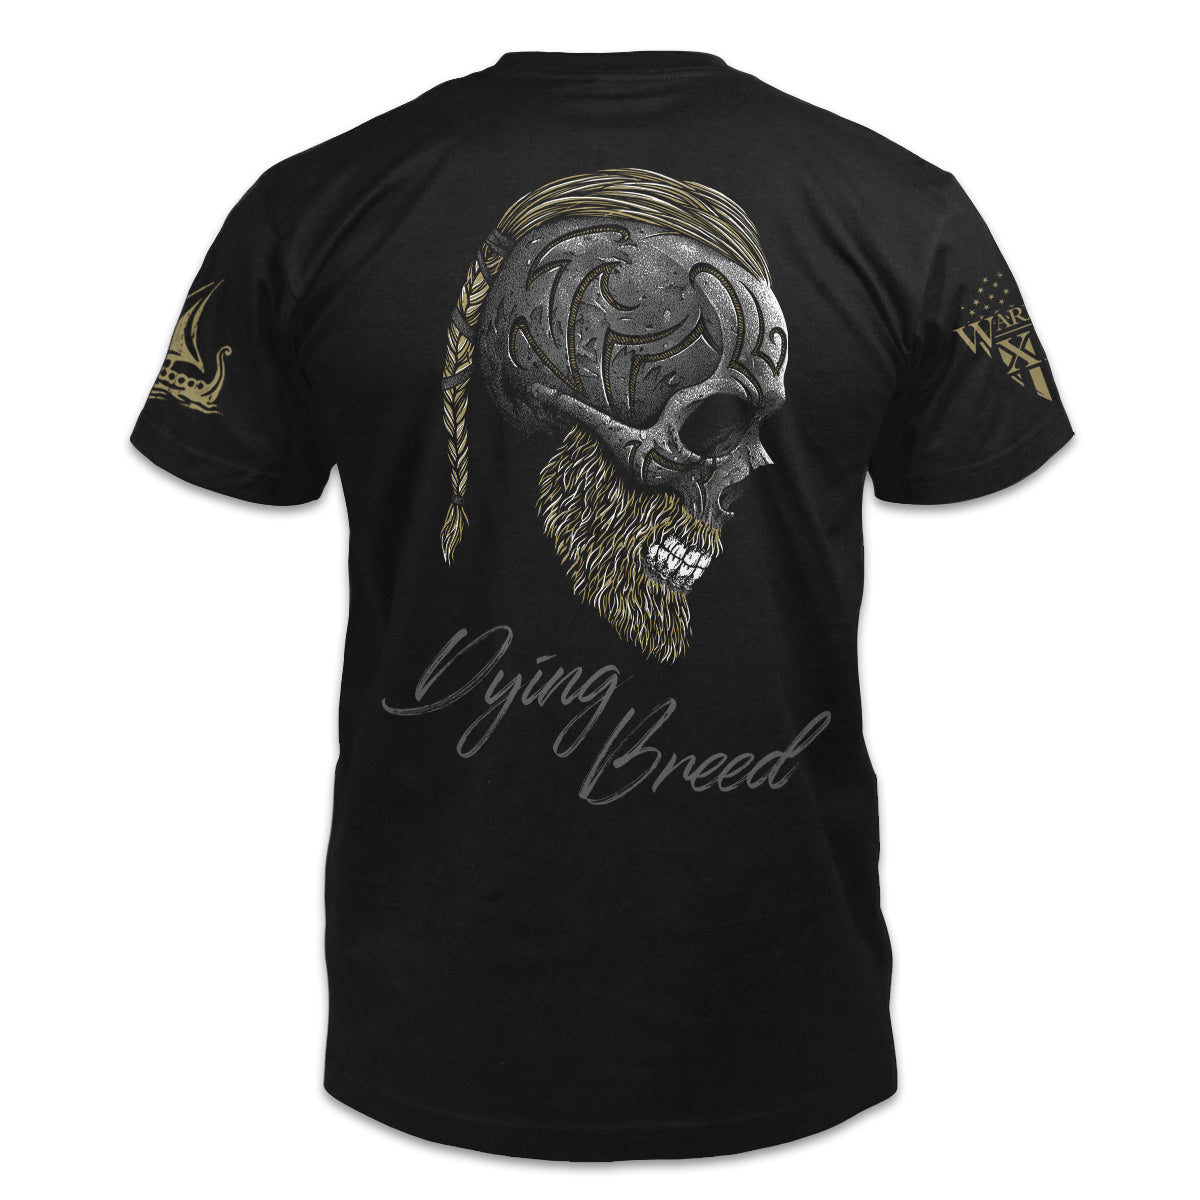 A black t-shirt with the words "Dying Breed" with a side view of a warrior head printed on the back of the shirt.